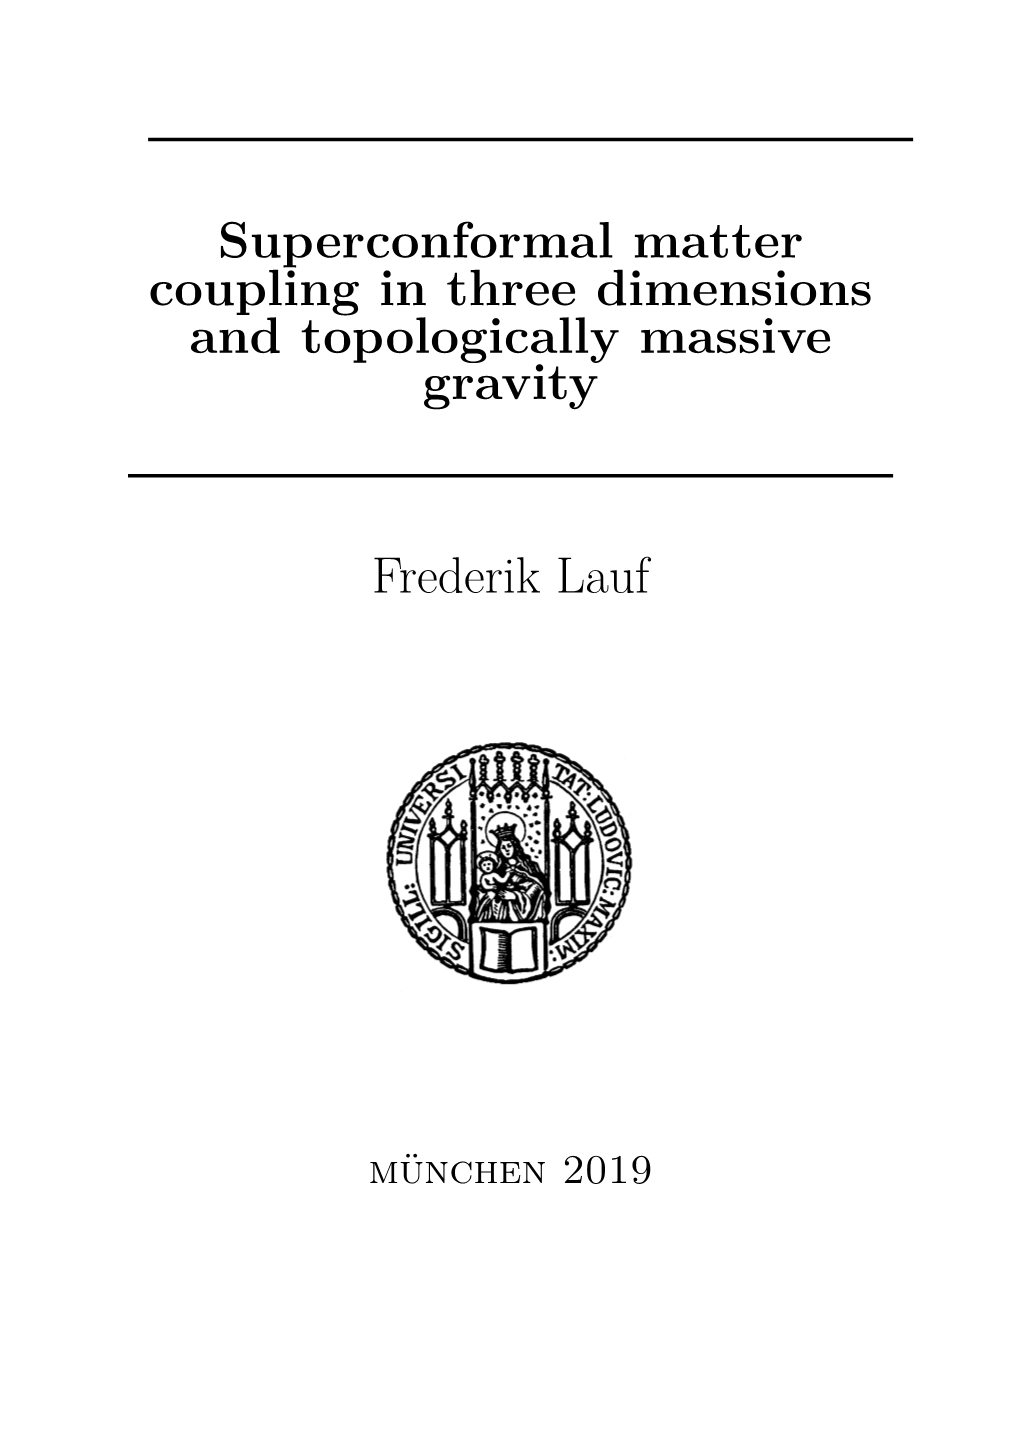 Superconformal Matter Coupling in Three Dimensions and Topologically Massive Gravity